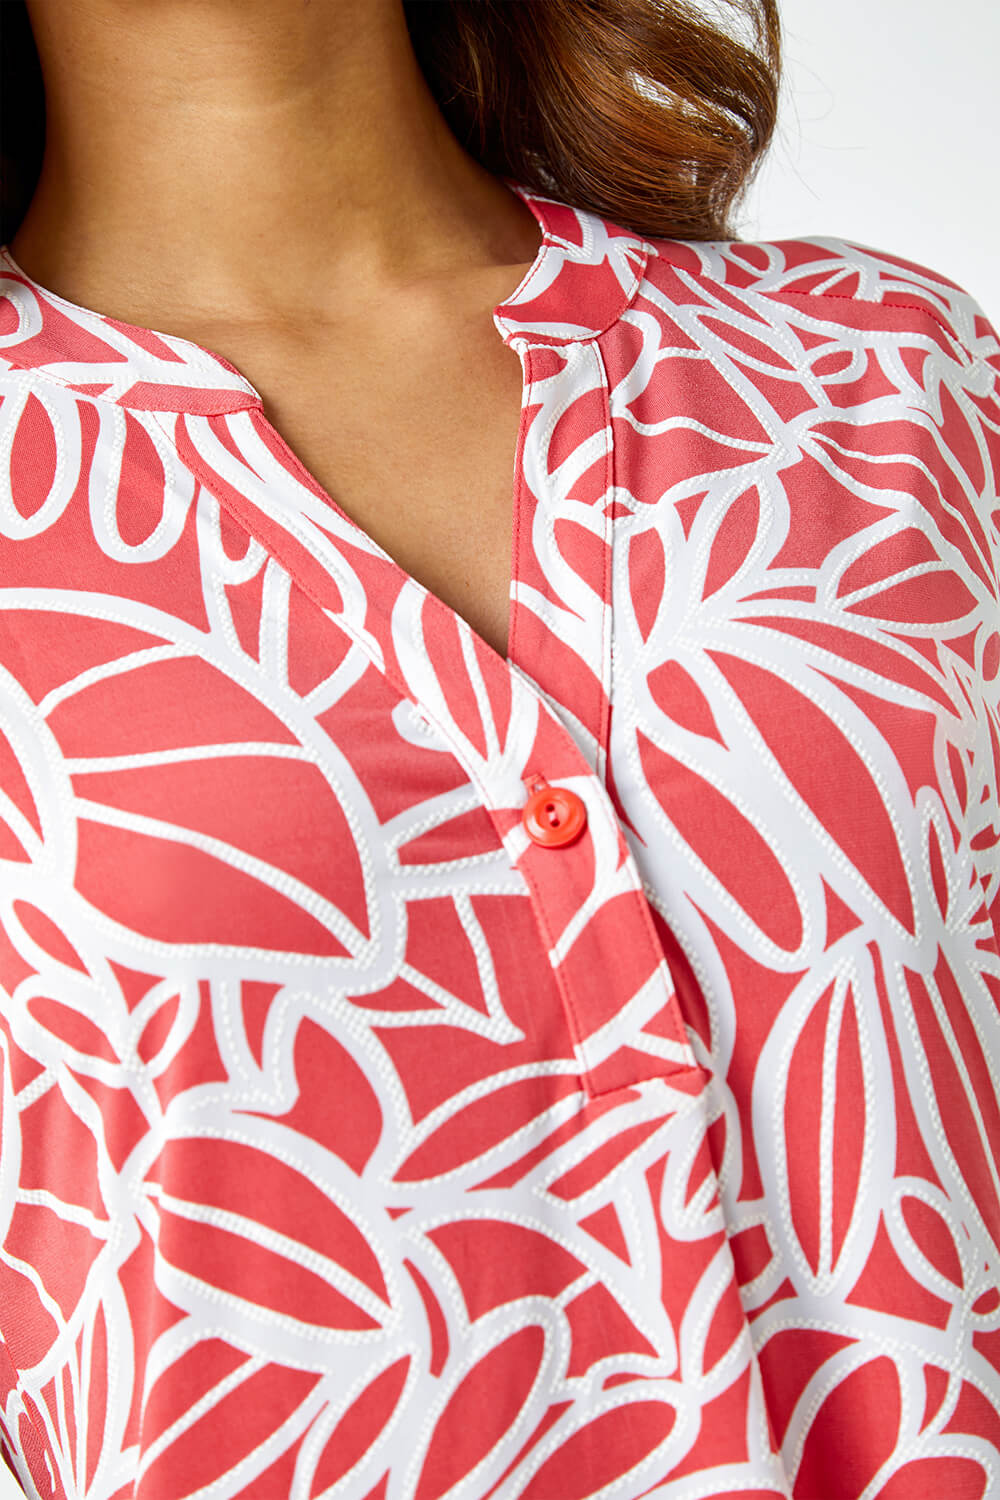 PINK Linear Floral Print Pleat Front Top, Image 5 of 5